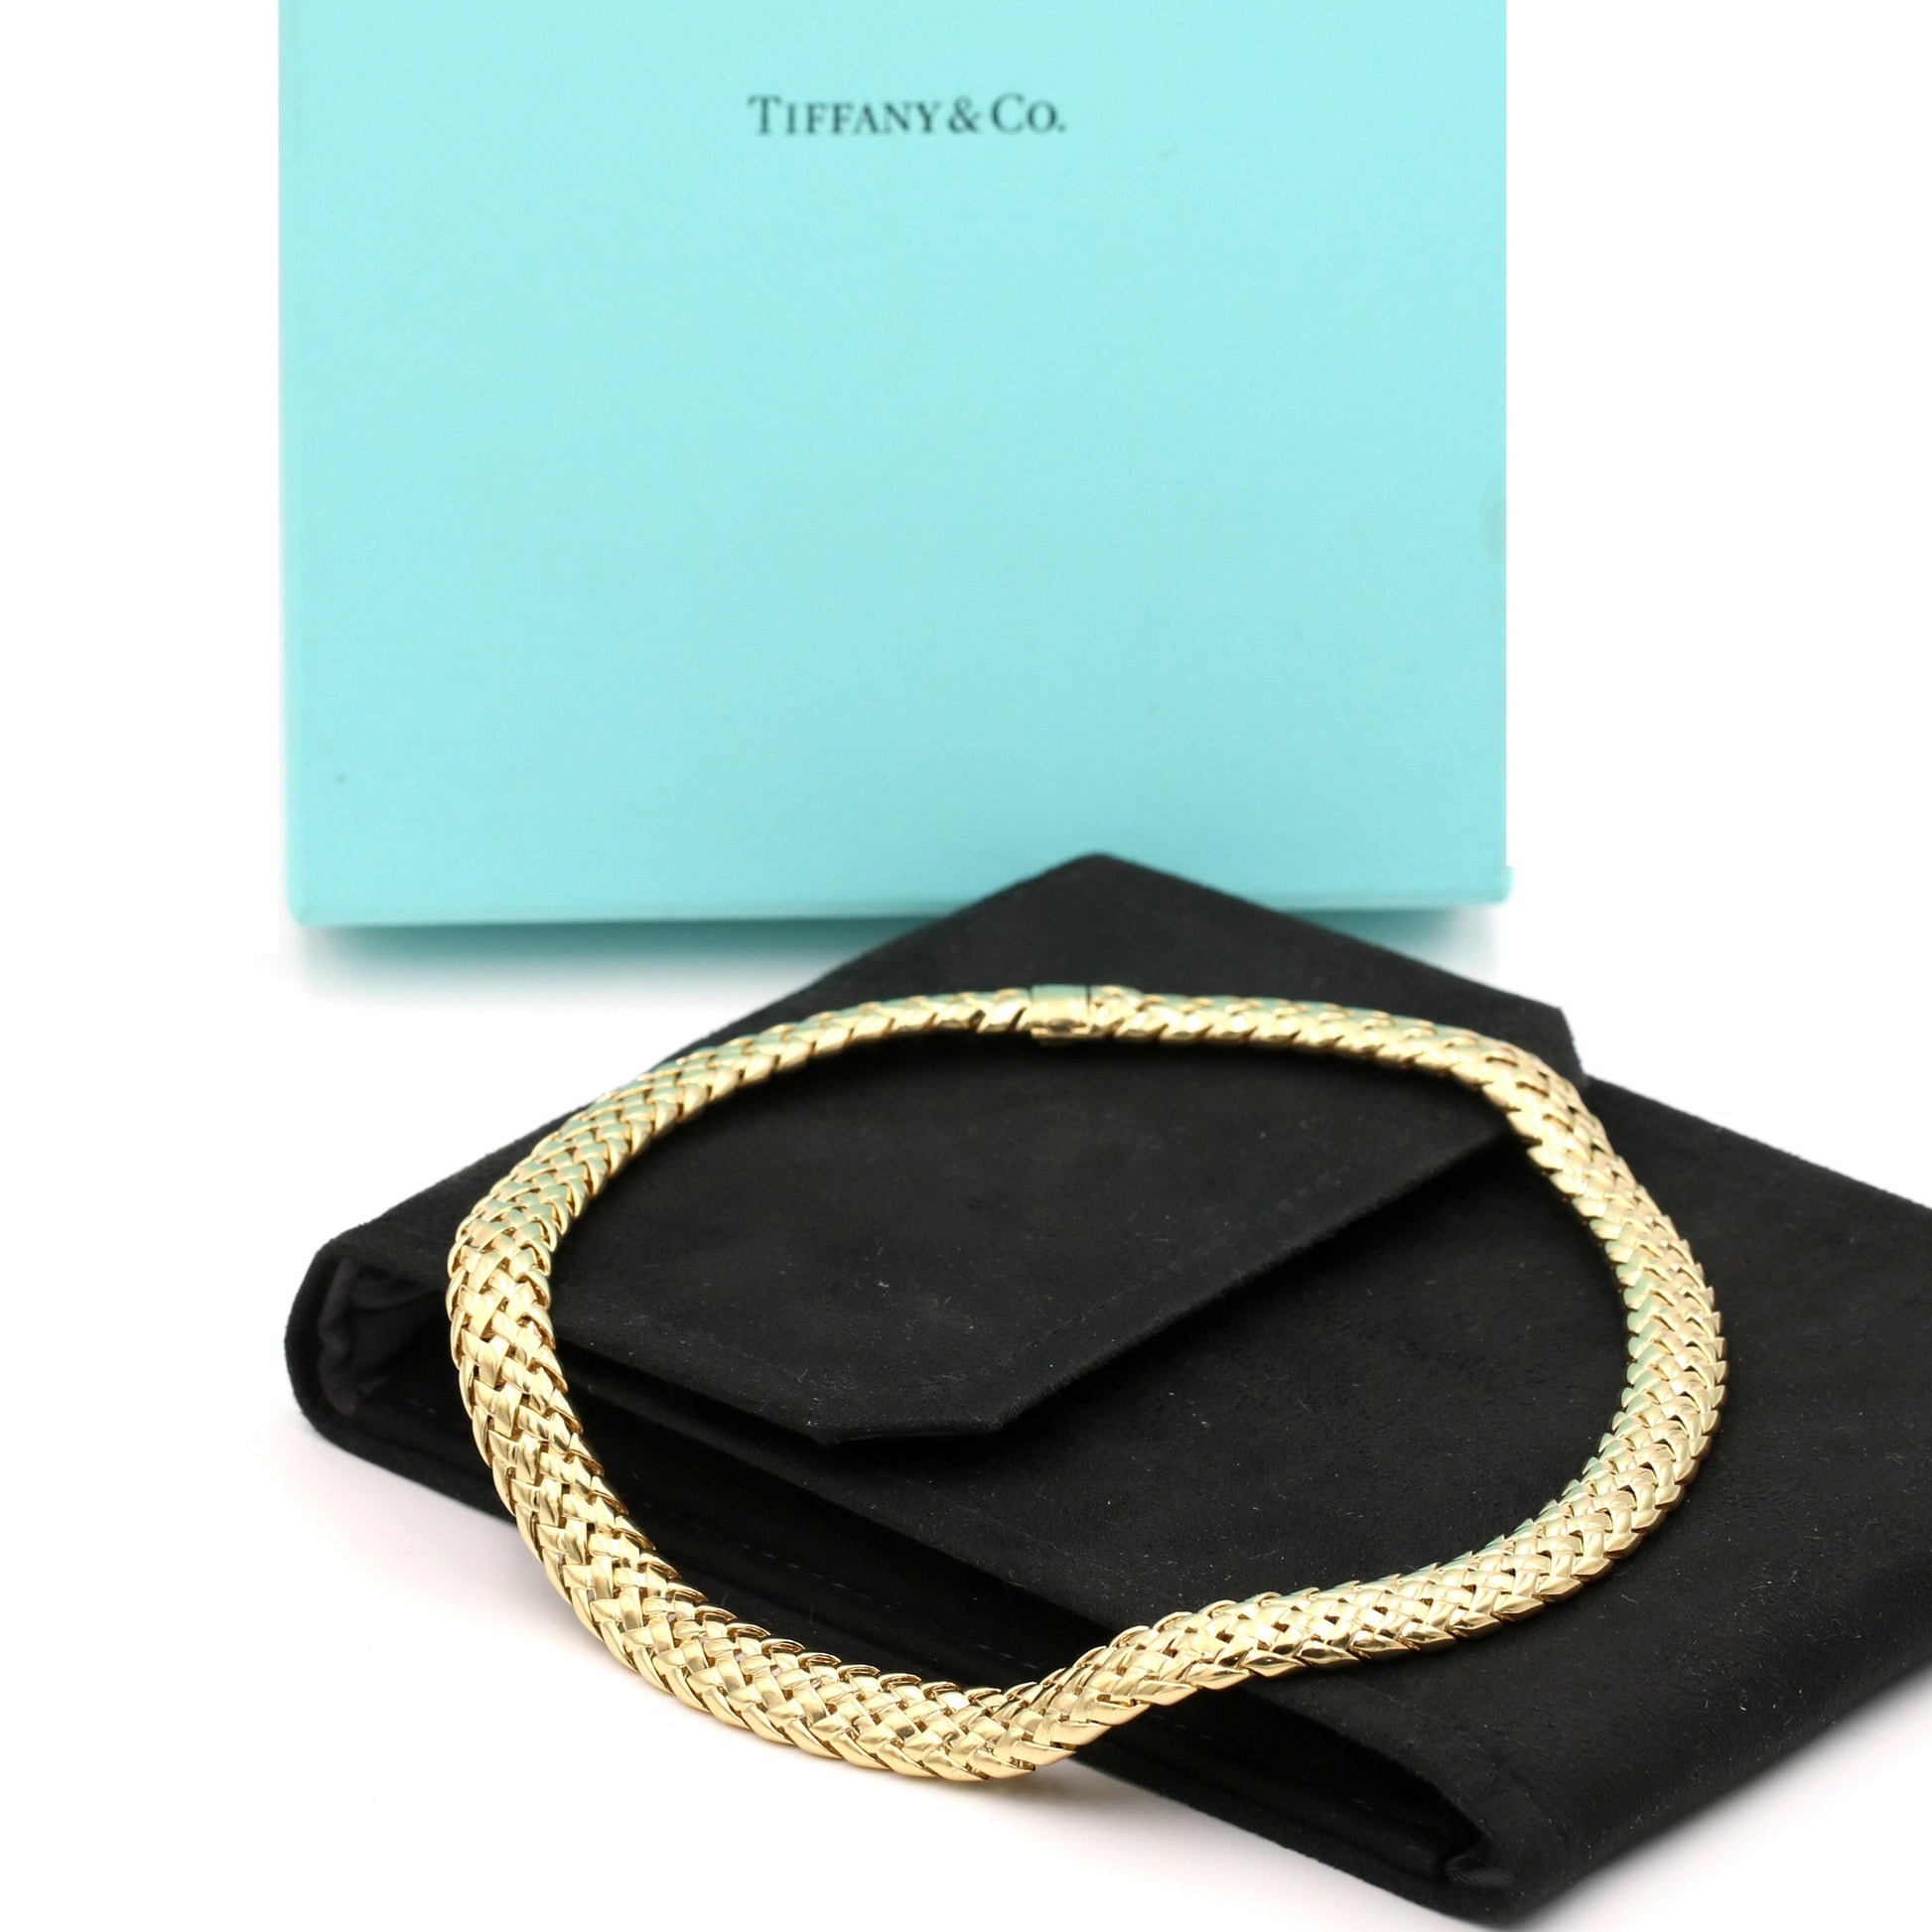 Tiffany & Co. Vannerie Women's Necklace in 18k Yellow Gold - 31 Jewels Inc.